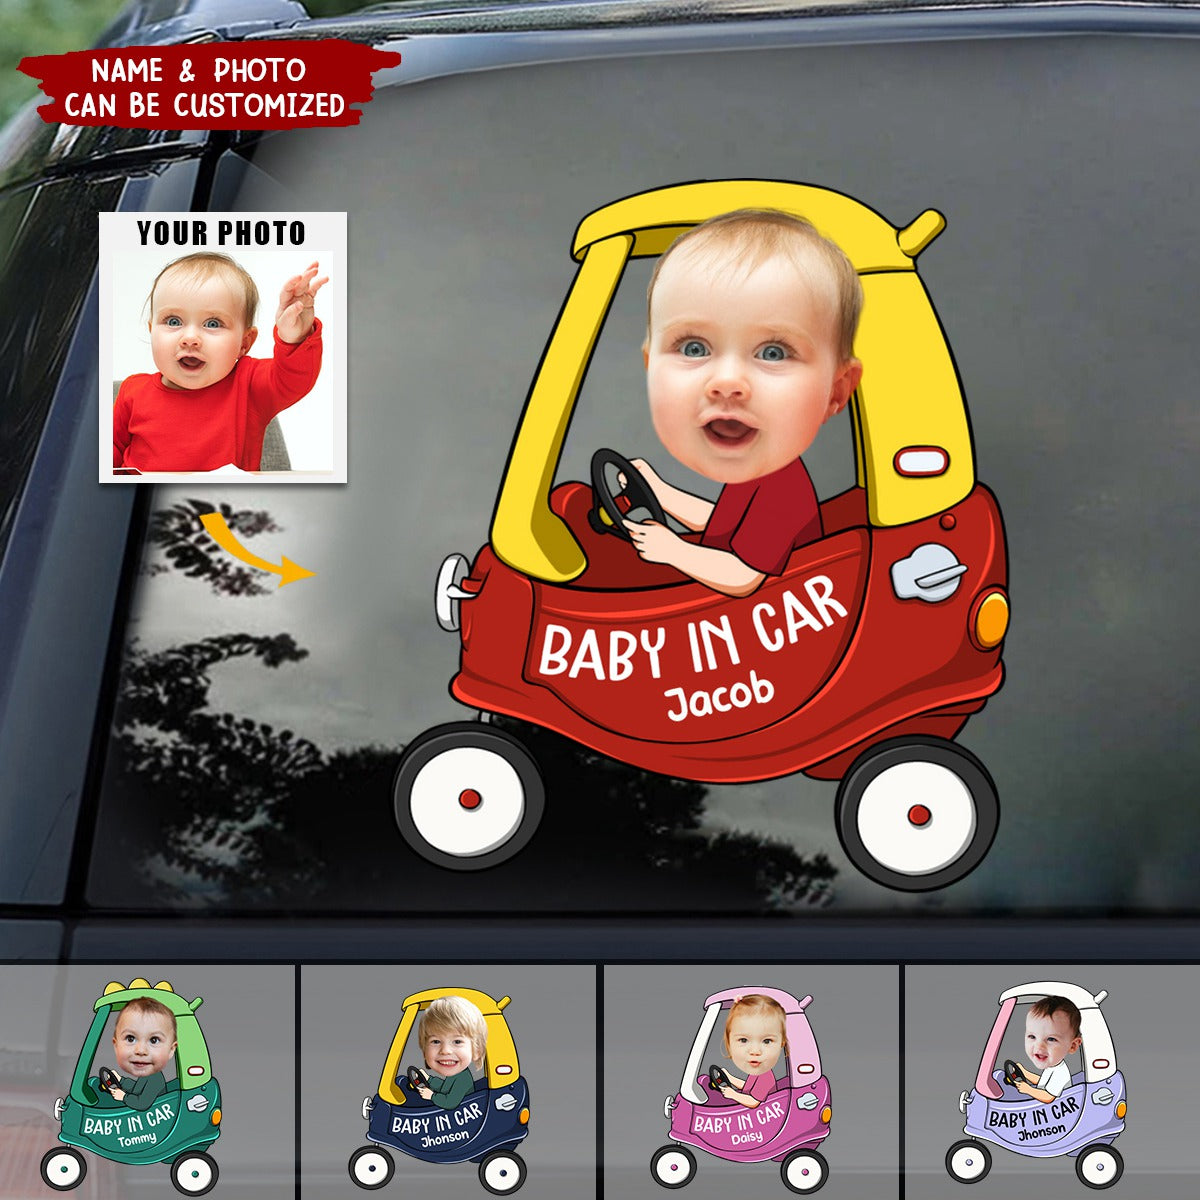 Baby In Car - Personalized Photo RV Decal